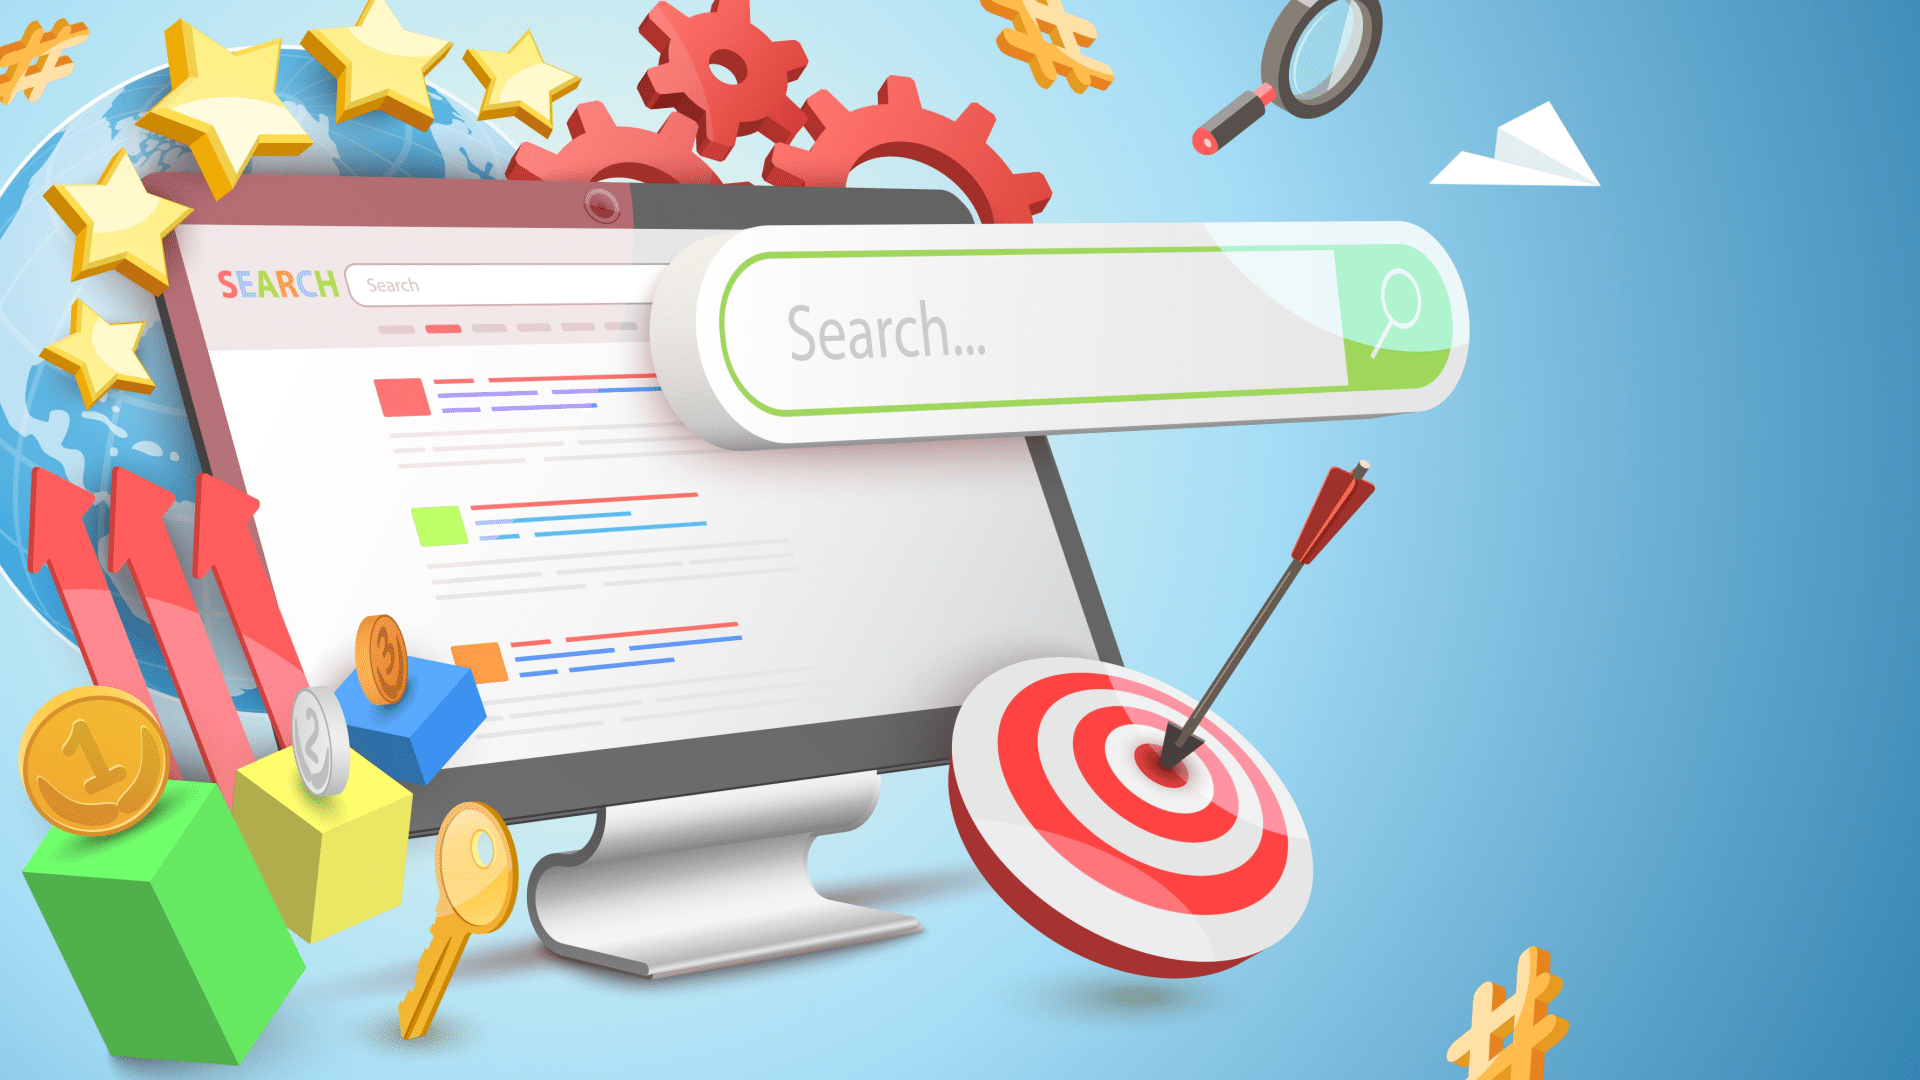 Why Is Link Relevance Important For Ranking On Search Engines?